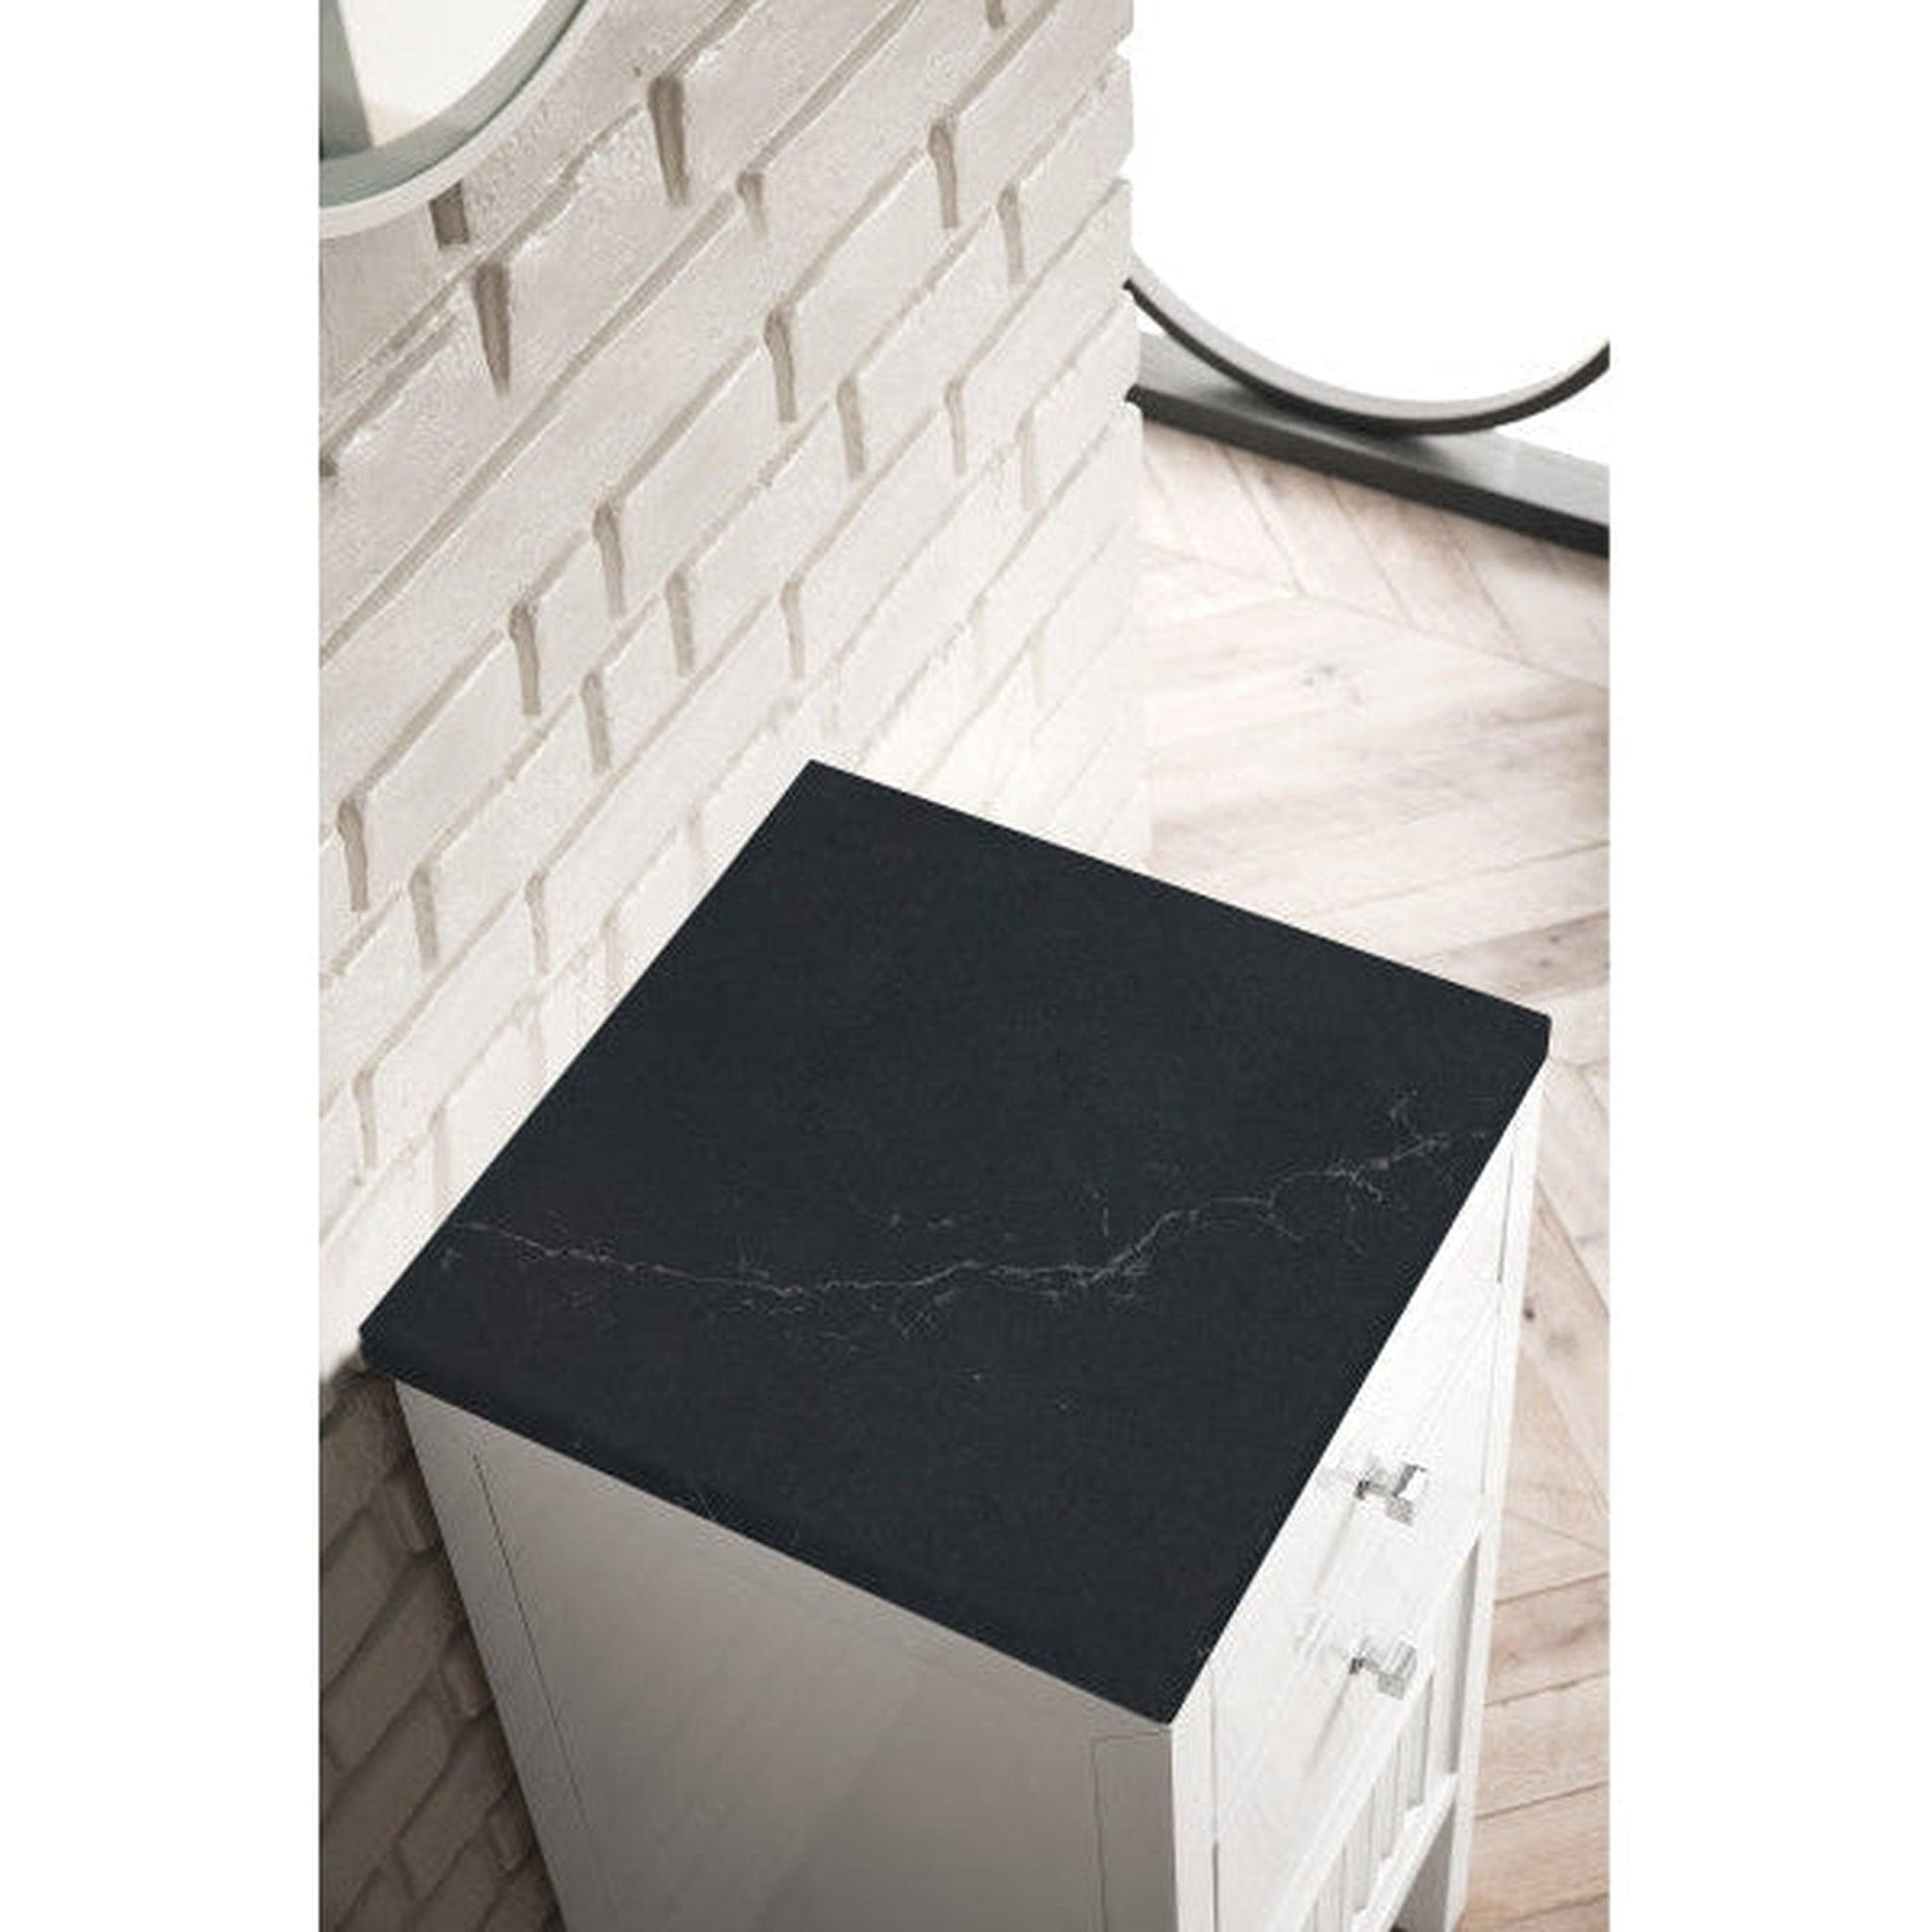 James Martin Athens 15" Right Side Opening Glossy White Side Cabinet With 1" Charcoal Soapstone Quartz Top